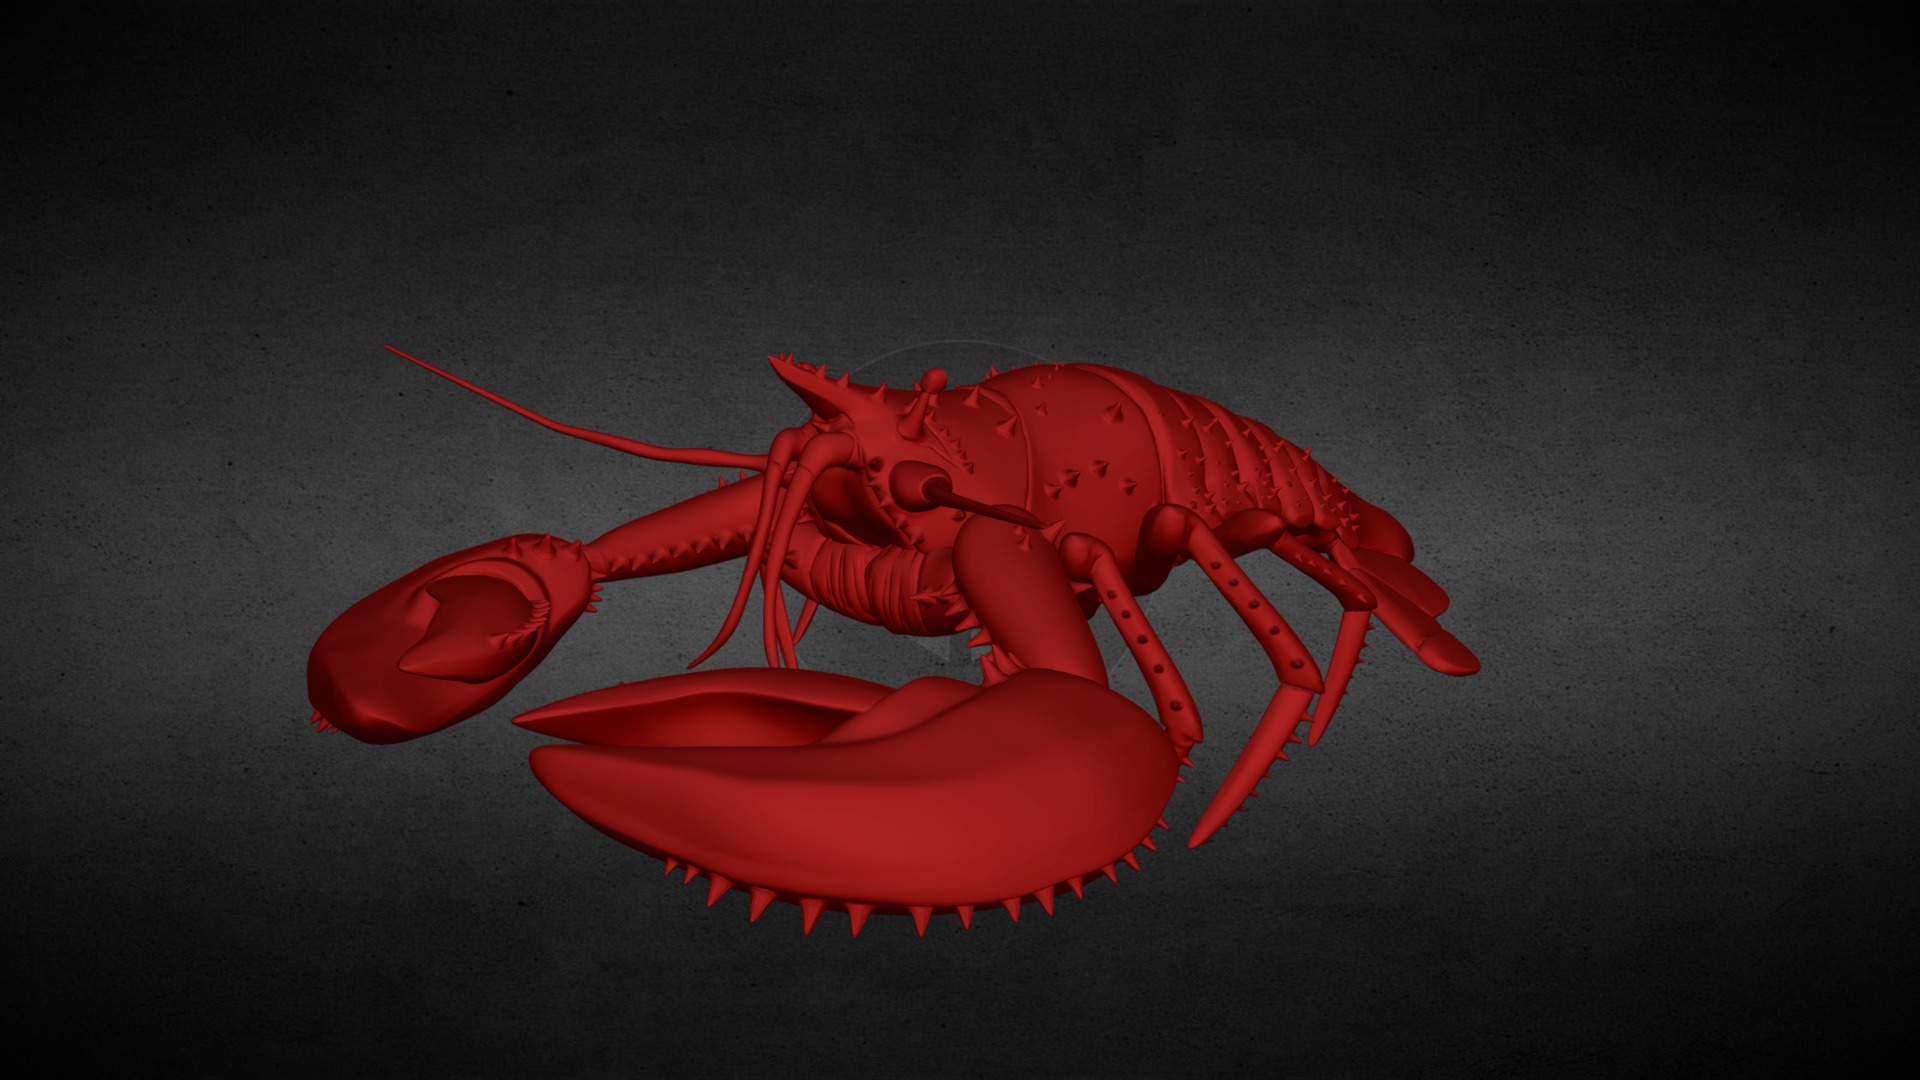 3D model Day 11 Lobster #Sculptjanuary 2018 - This is a 3D model of the Day 11 Lobster #Sculptjanuary 2018. The 3D model is about a red toy crab.